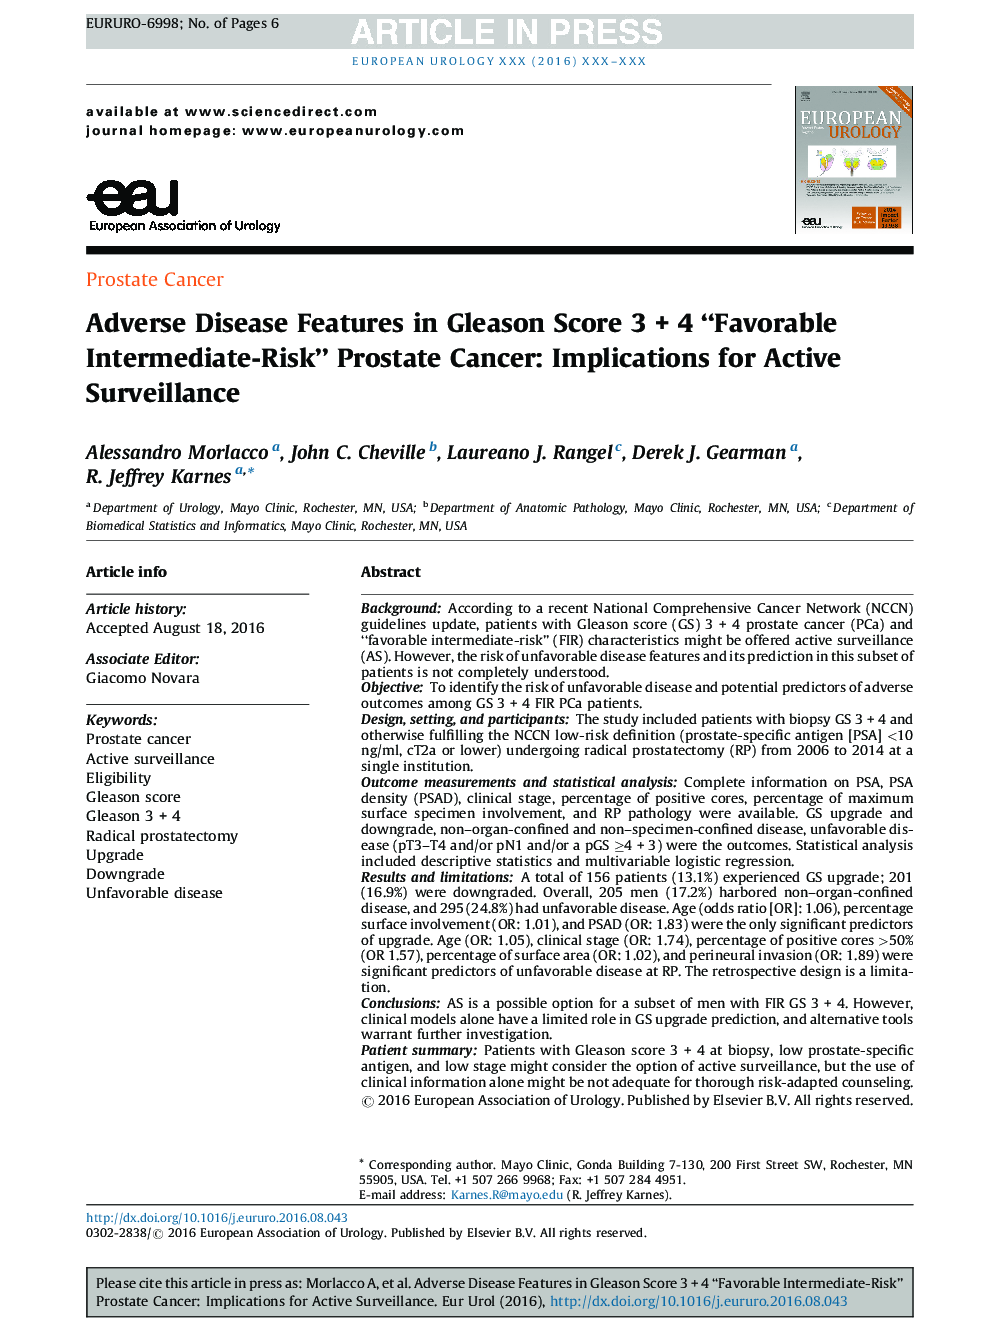 Adverse Disease Features in Gleason Score 3 + 4 “Favorable Intermediate-Risk” Prostate Cancer: Implications for Active Surveillance